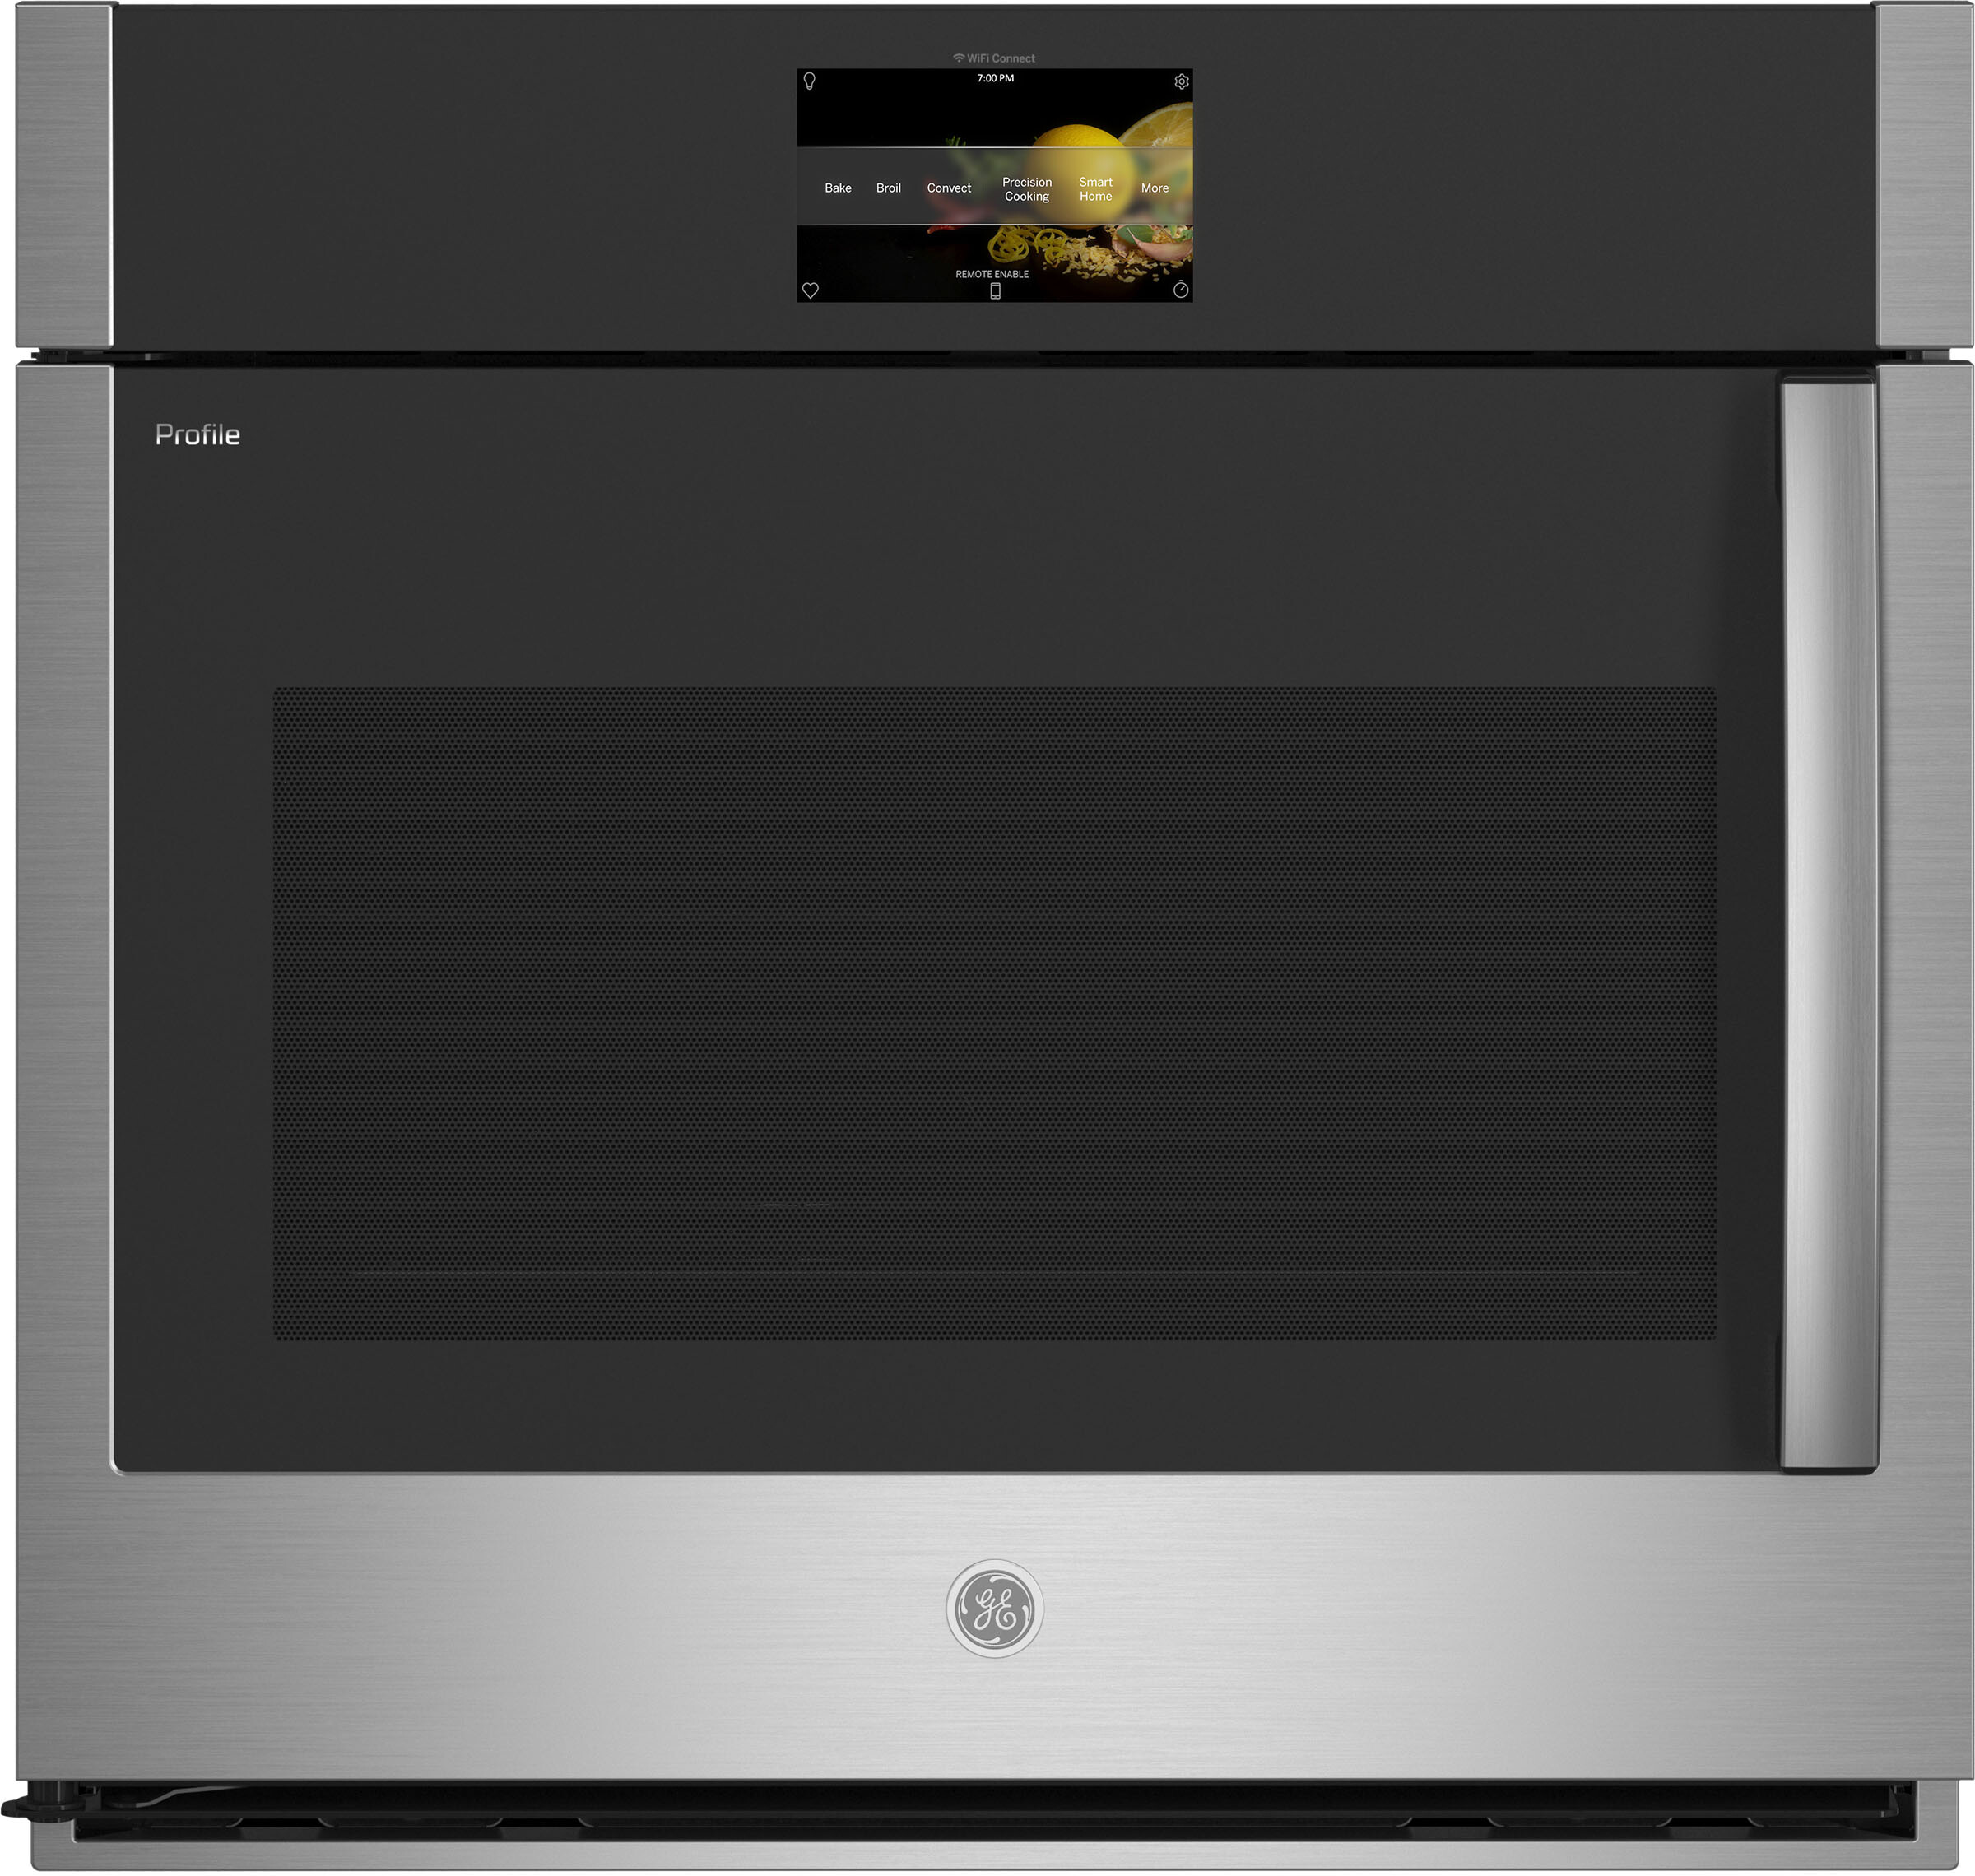 Profile 30"" Single Electric Wall Oven - GE PTS700LSNSS